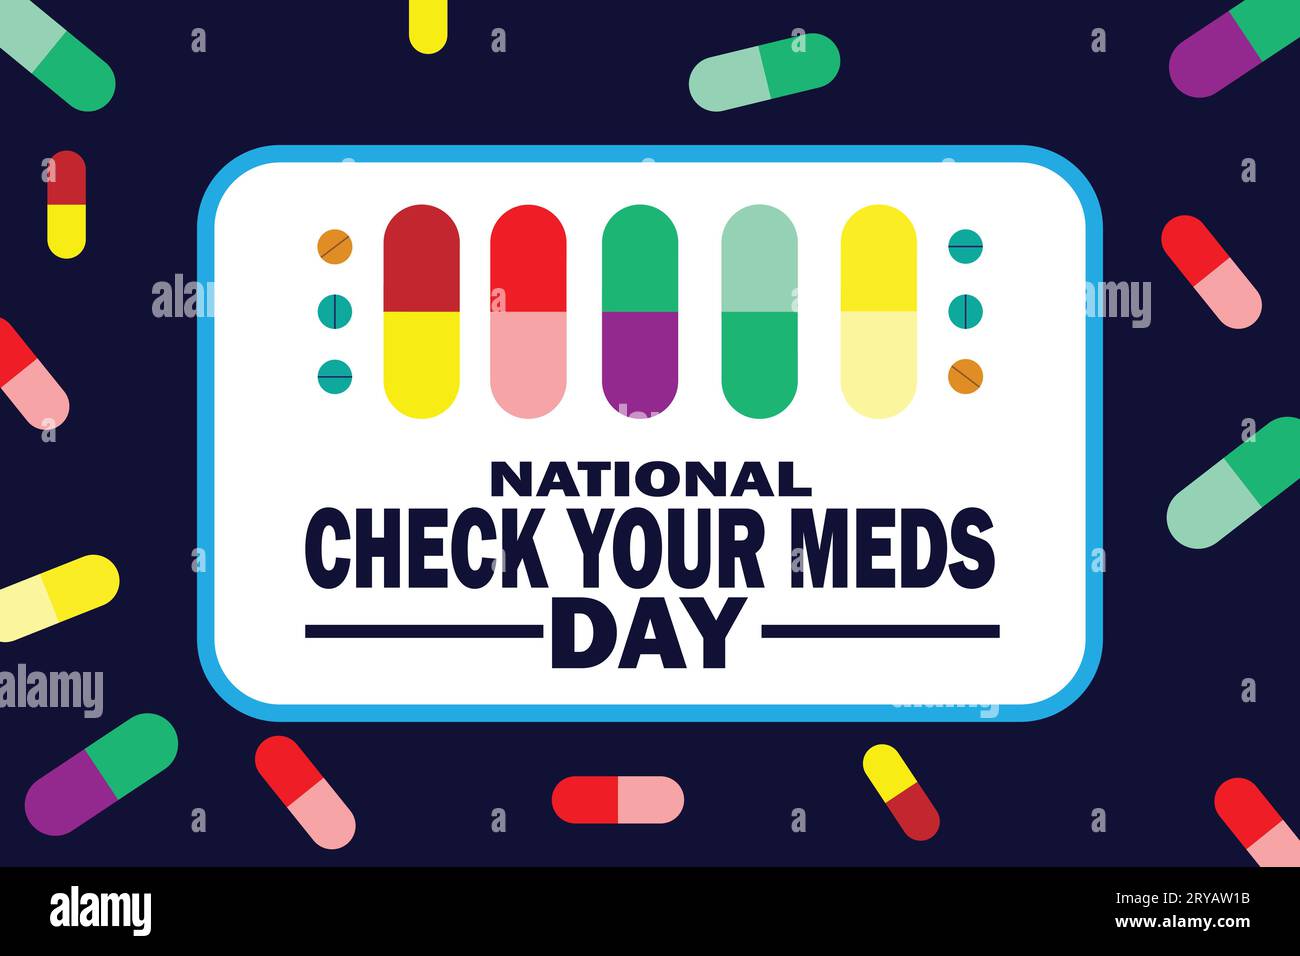 National Check Your Meds Day Vector illustration. for poster, banner, greeting card Stock Vector